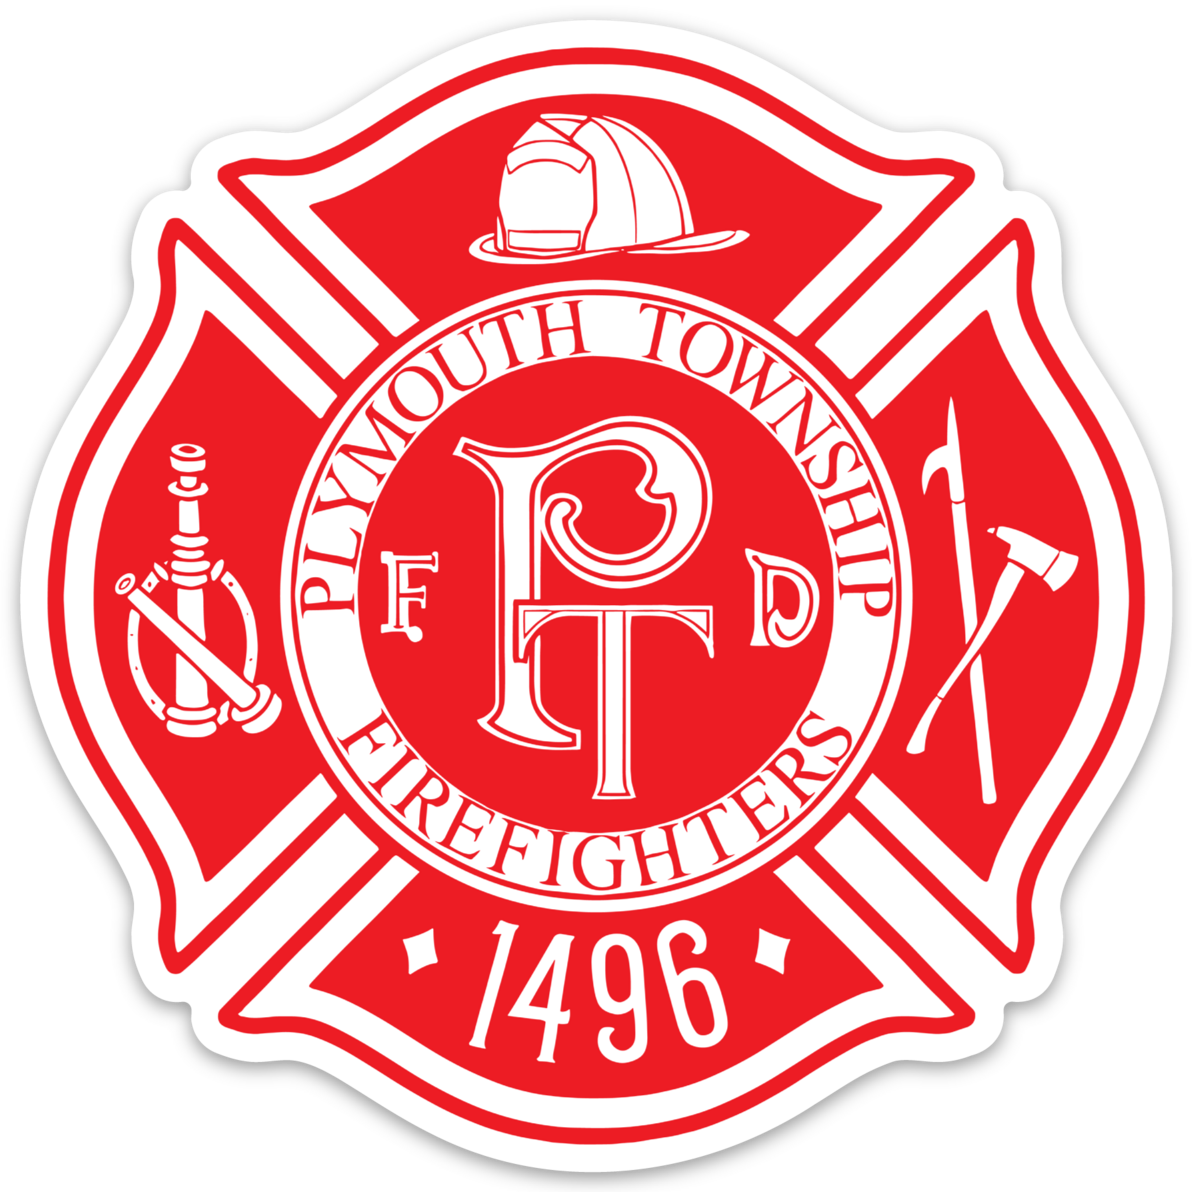 Plymouth Fire Department